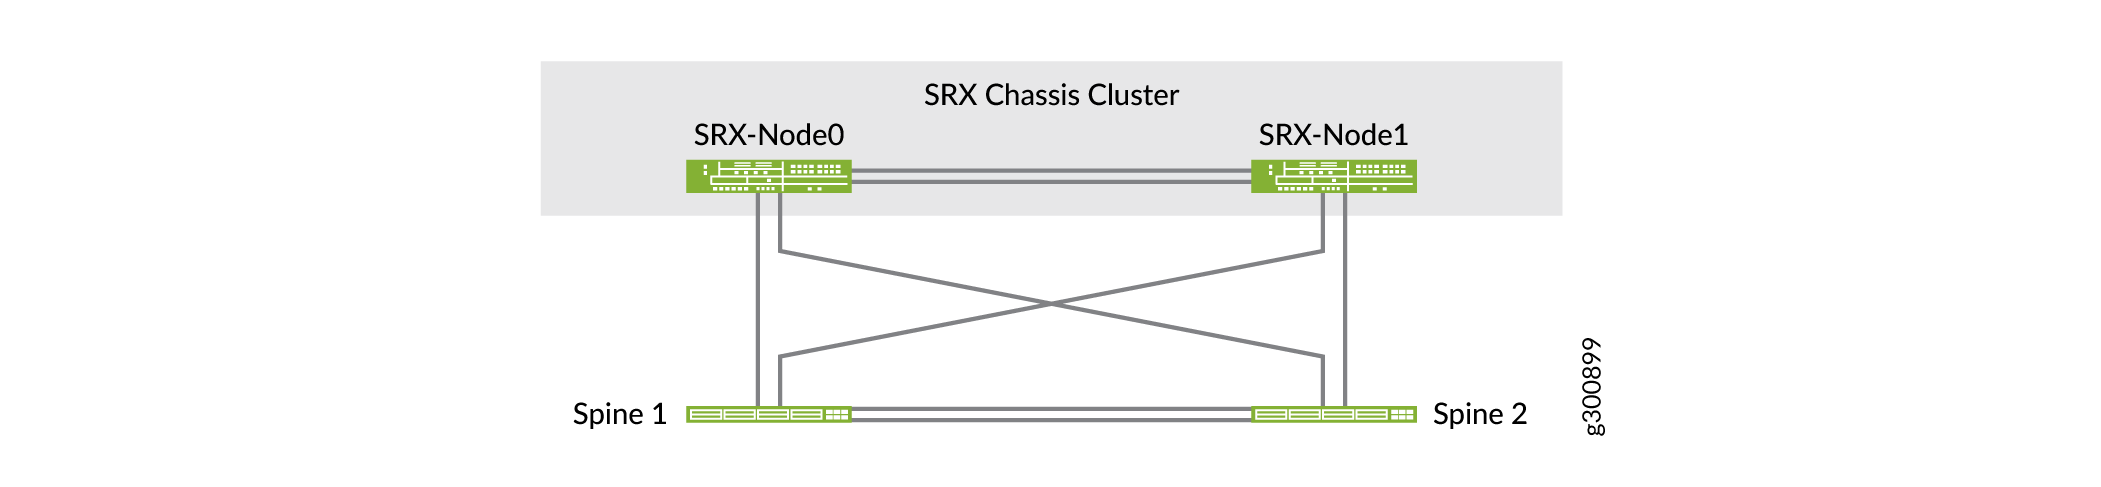 SRX Chassis Cluster Implementation